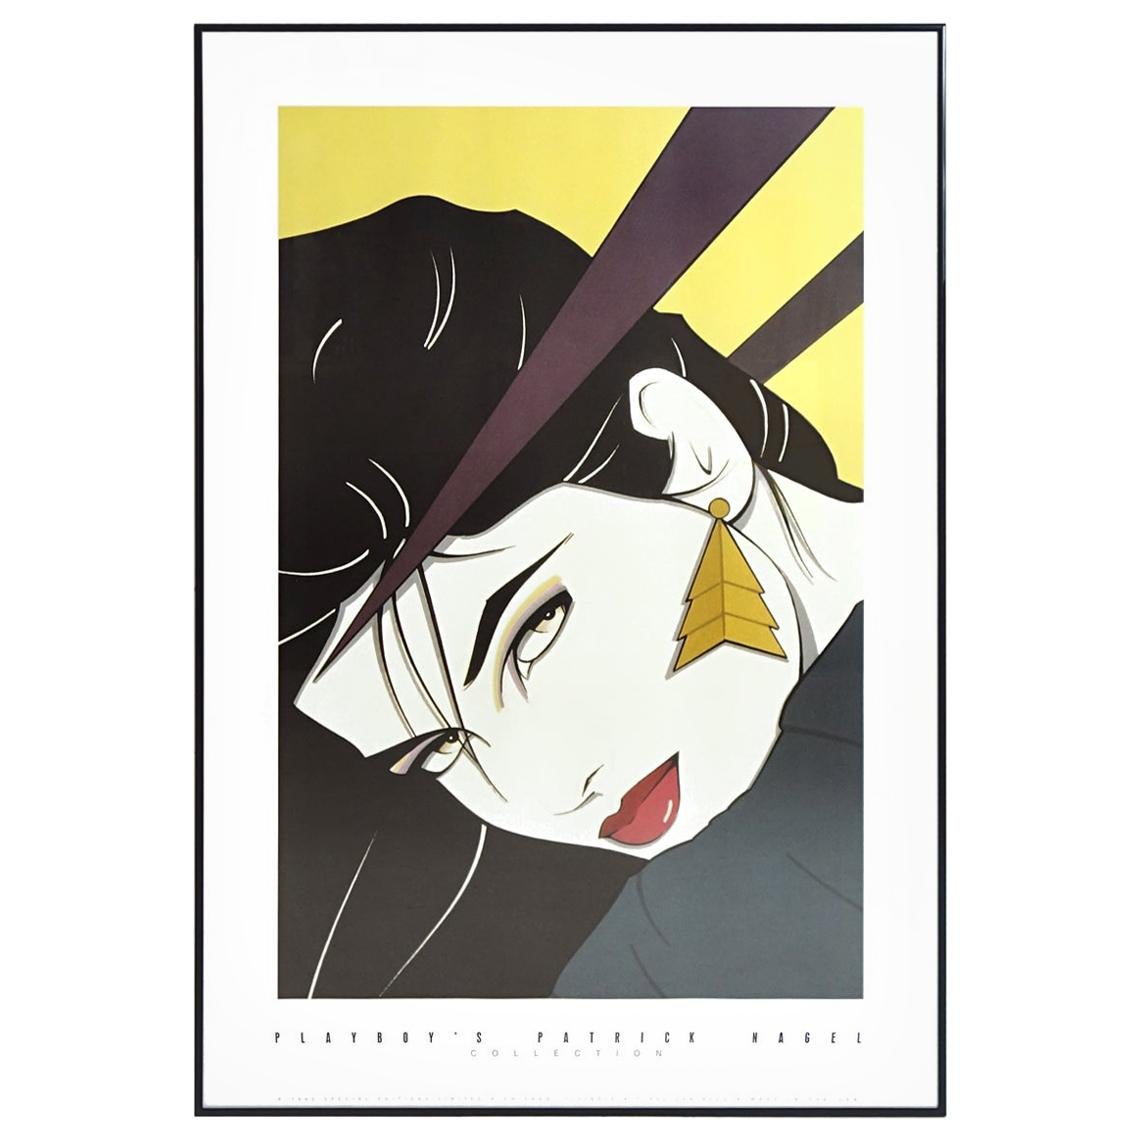 Poster "Playboy's Patrick Nagel Collection" 1993 Special Editions Limited